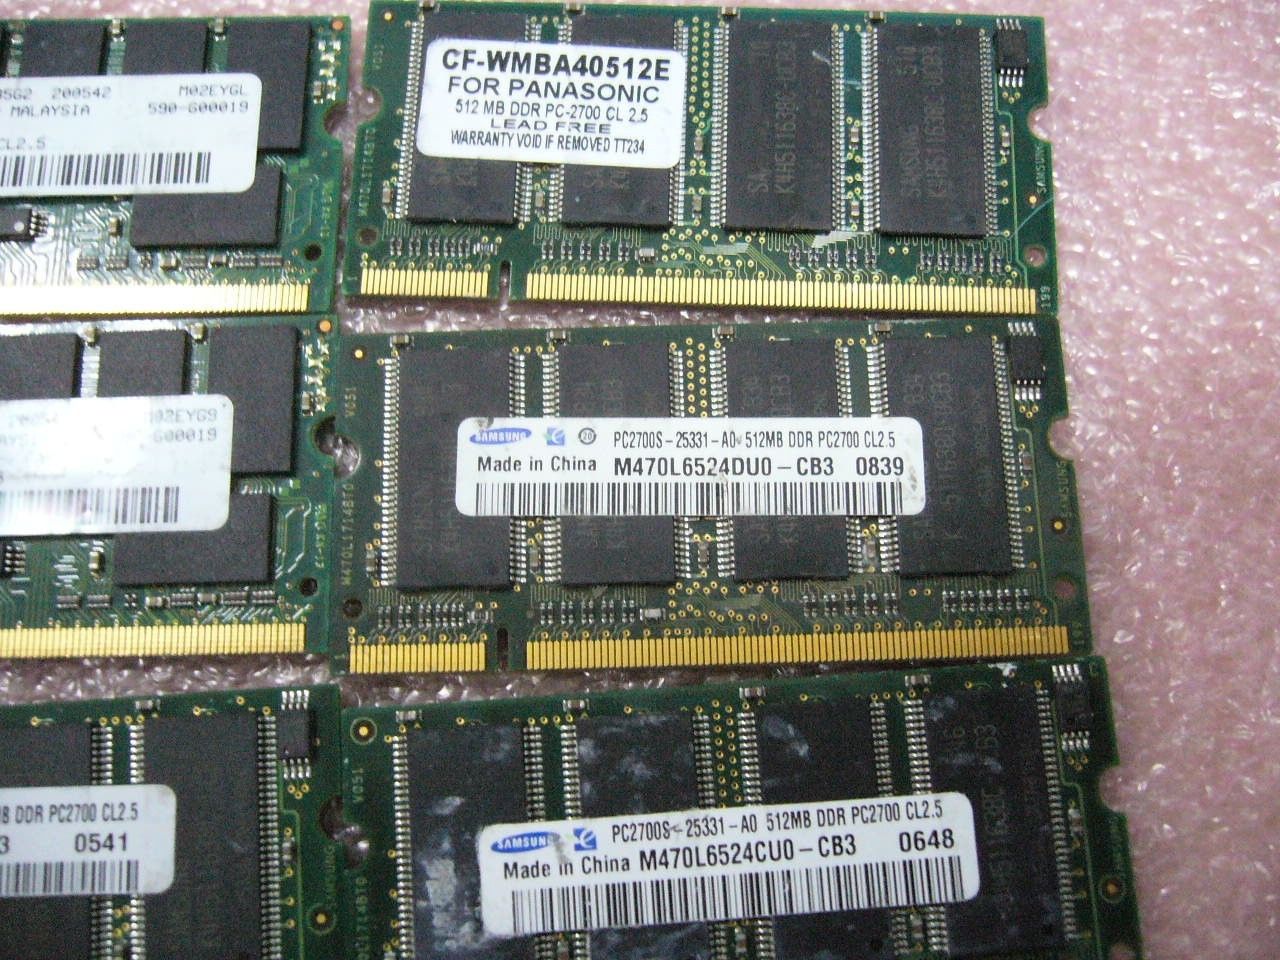 Lot 1GB QTY 2x 512MB DDR 333Mhz PC2700S SO-DIMM memory stick for laptop - Click Image to Close